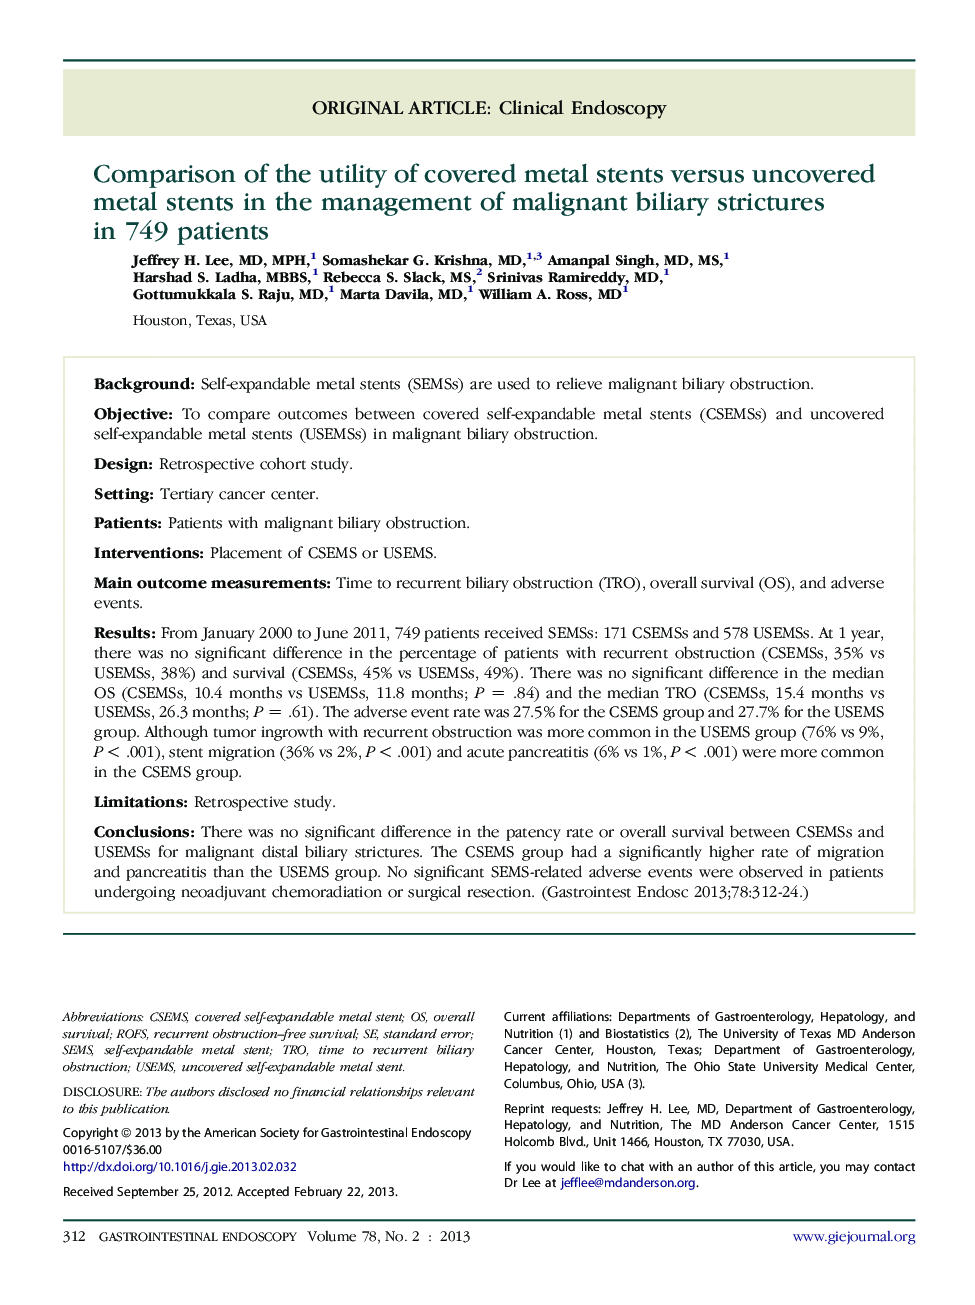 Comparison of the utility of covered metal stents versus uncovered metal stents in the management of malignant biliary strictures in 749 patients 